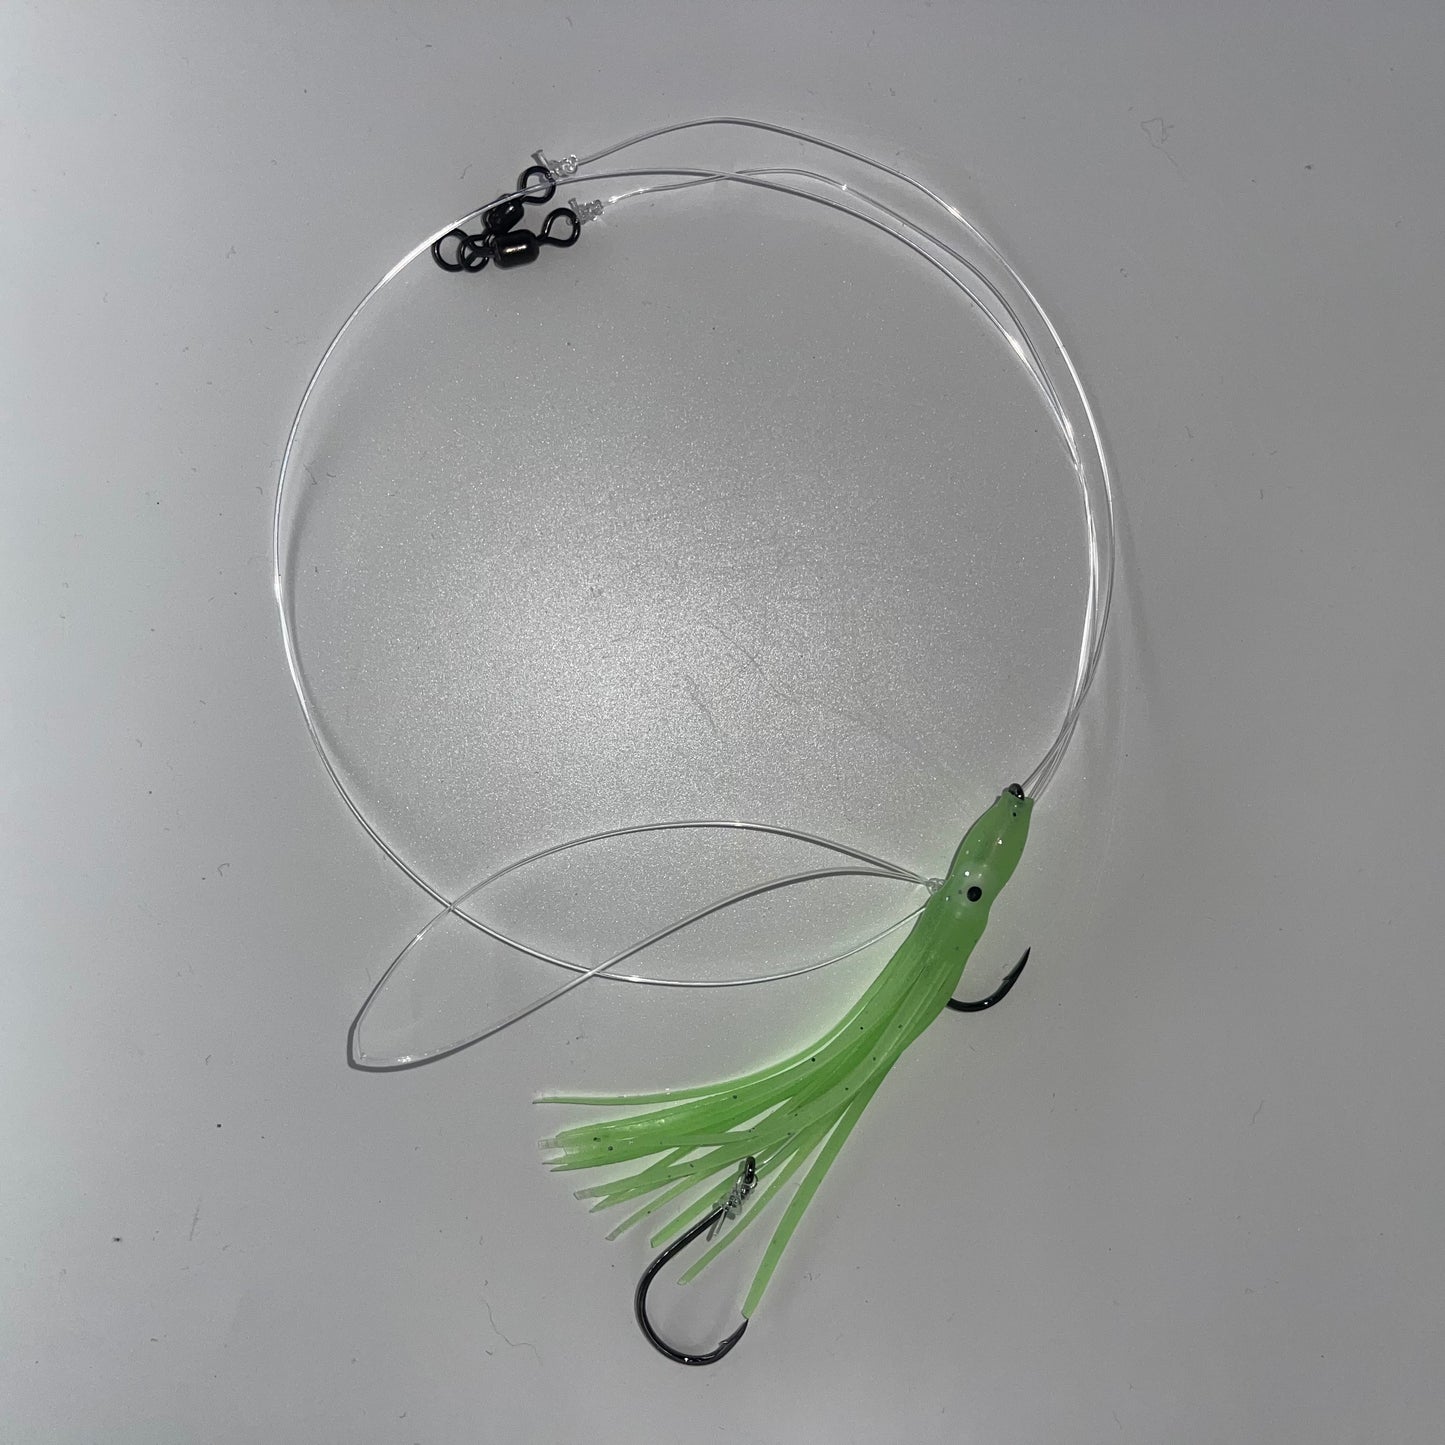 Snelled Paternoster Fishing Bait Rigs – Tuff Rigs